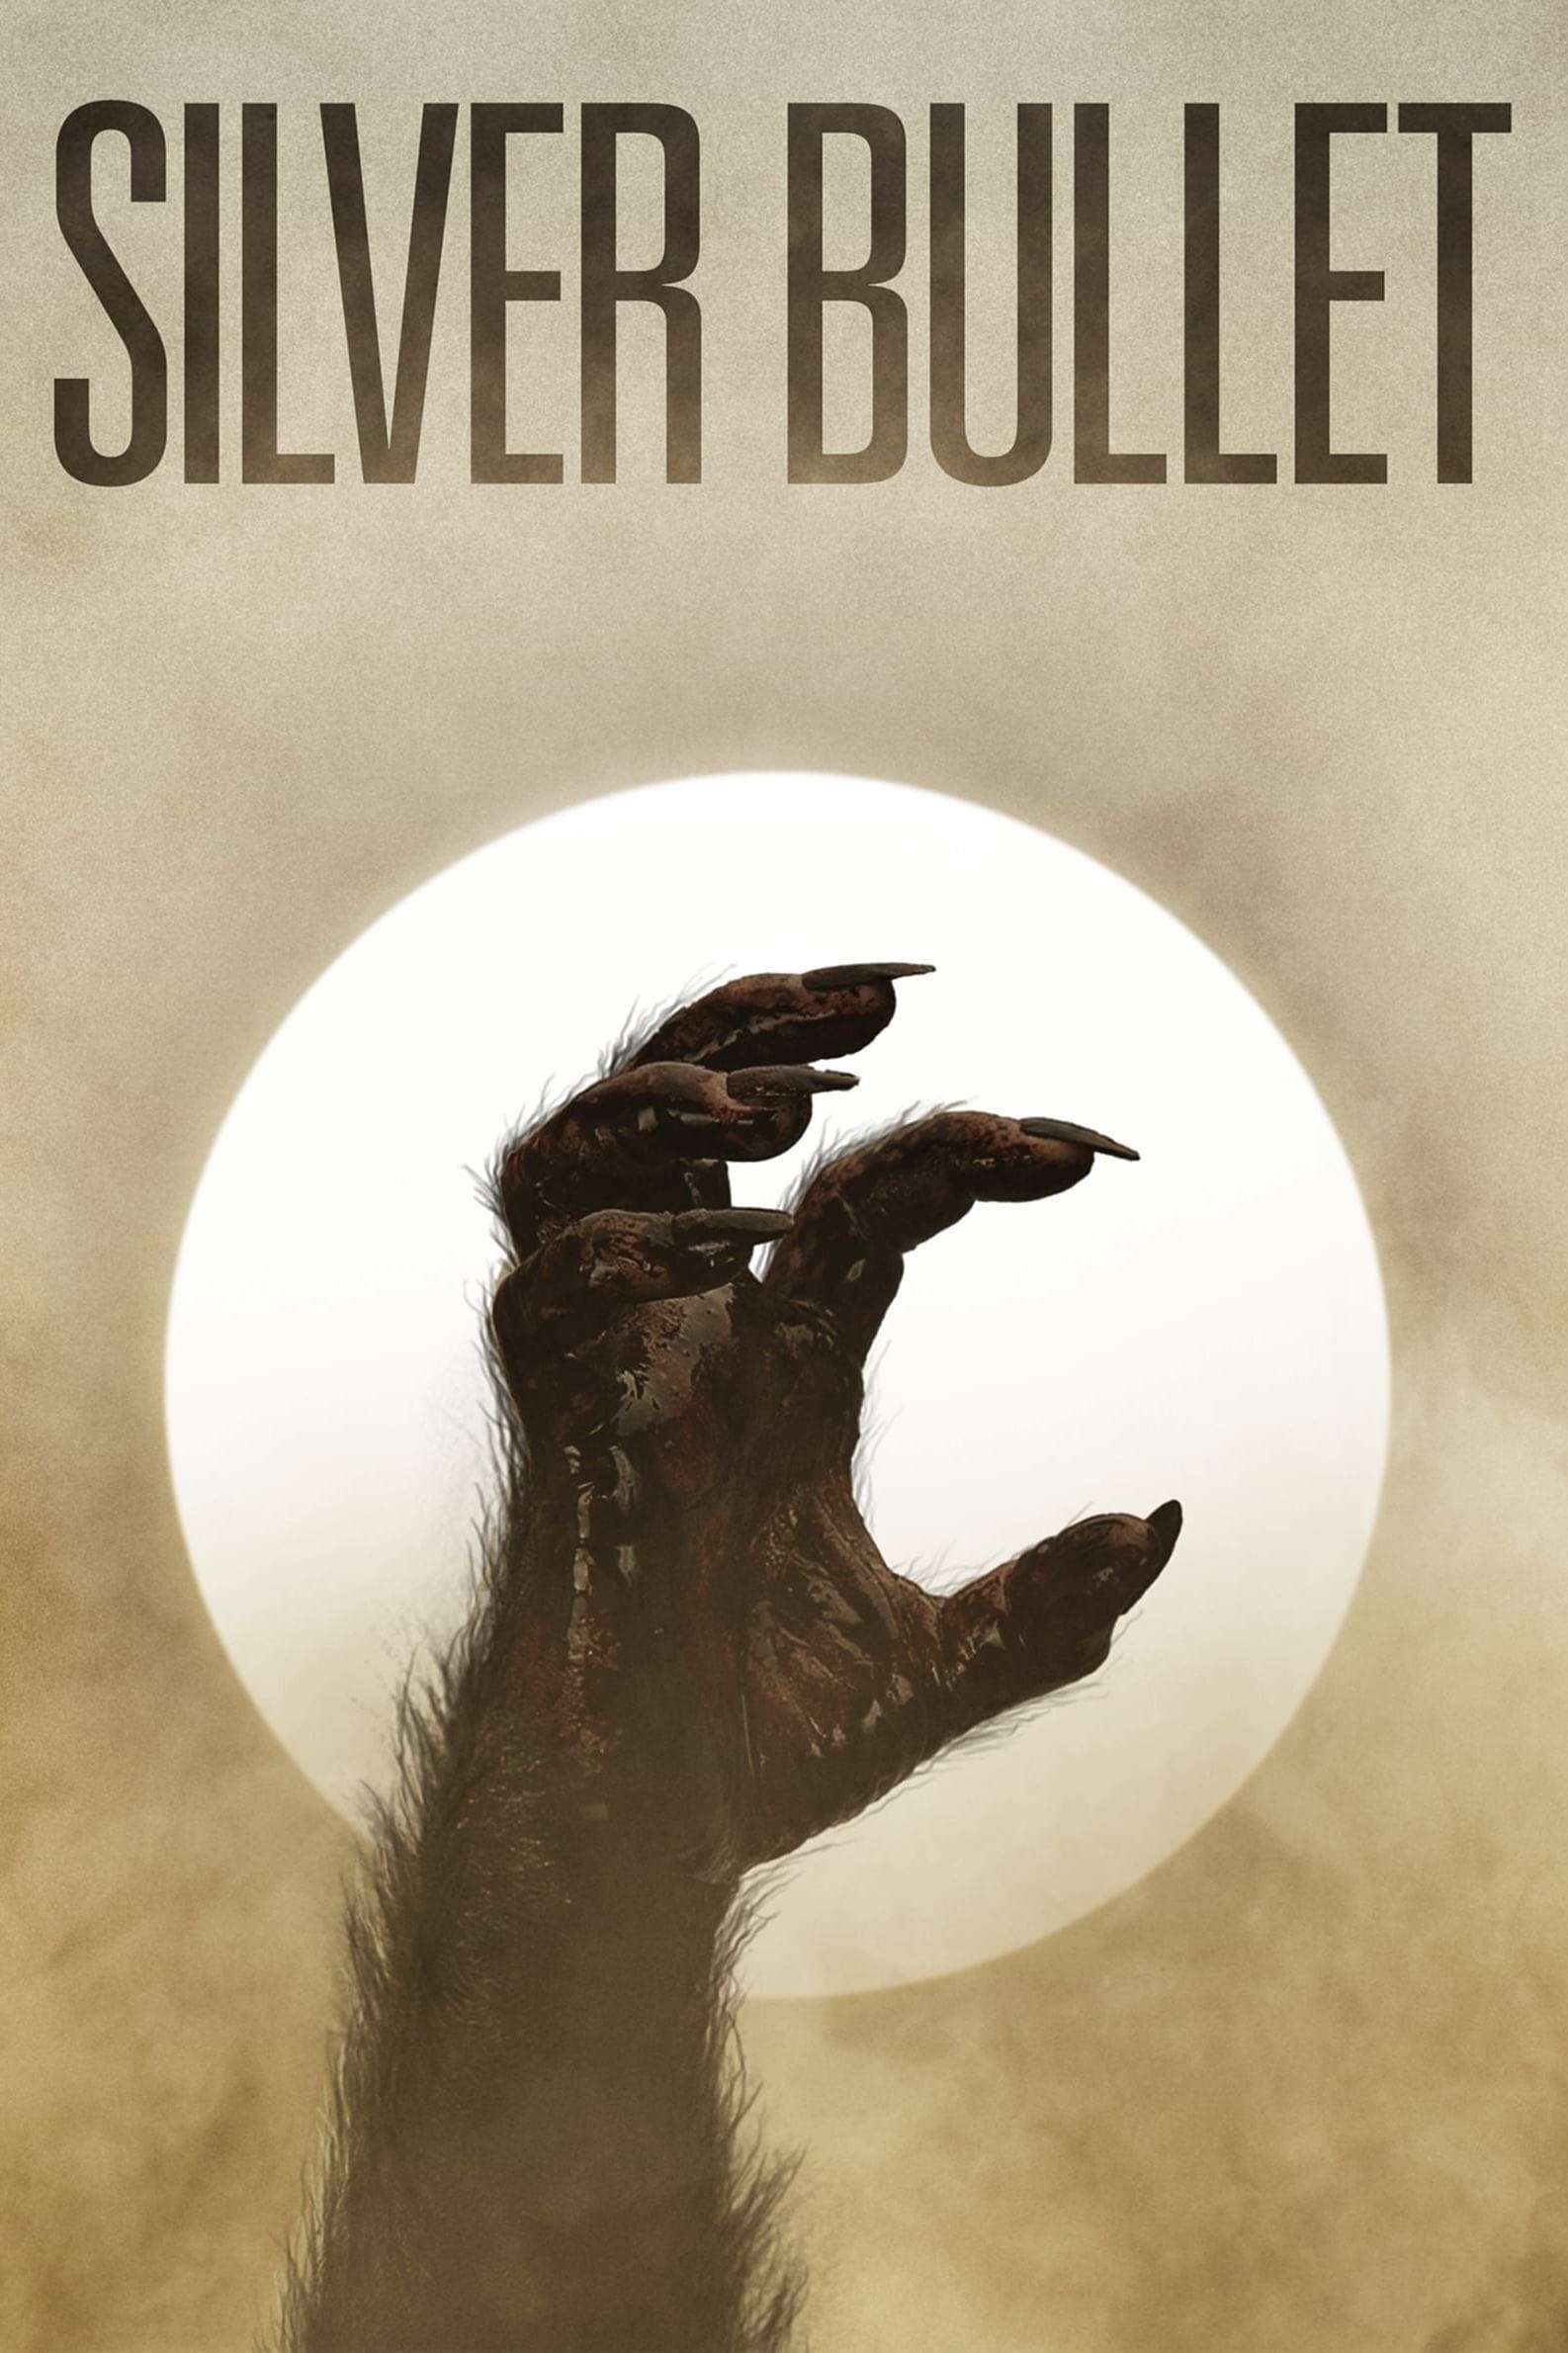 We are celebrating Stephen King's birthday with a showing of the movie Silver Bullet based on his short story Cycle of the Werewolf.